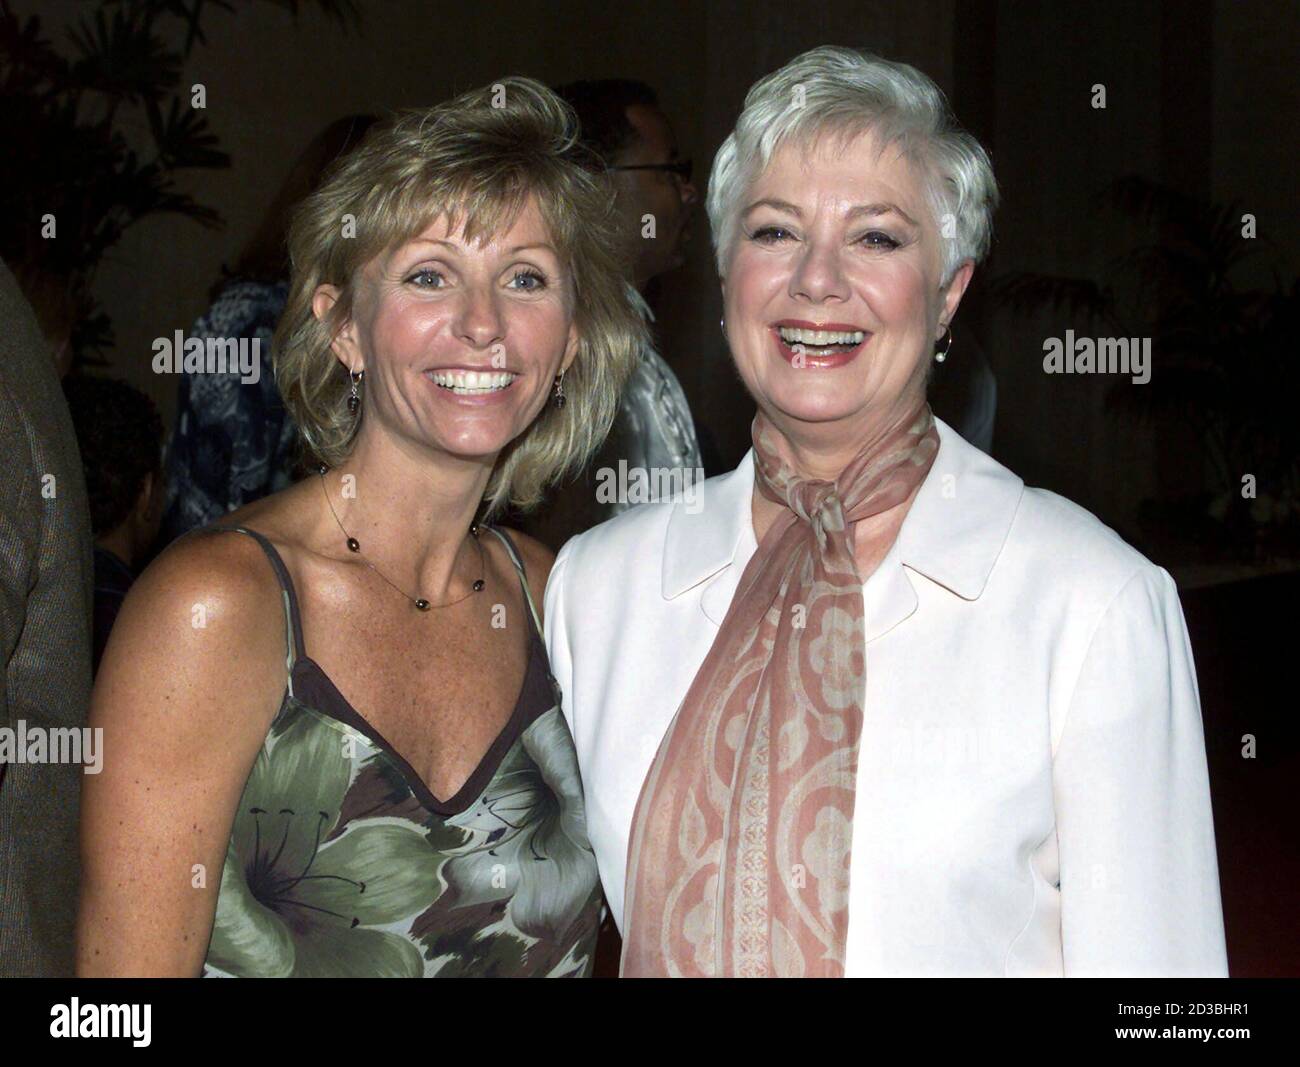 Tina Wesson, winner of the reality series " Survivor II Australian Outback," poses with actress Shirley Jones as they arrive at the Family Television Awards August 2, 2001 in Beverly Hills.